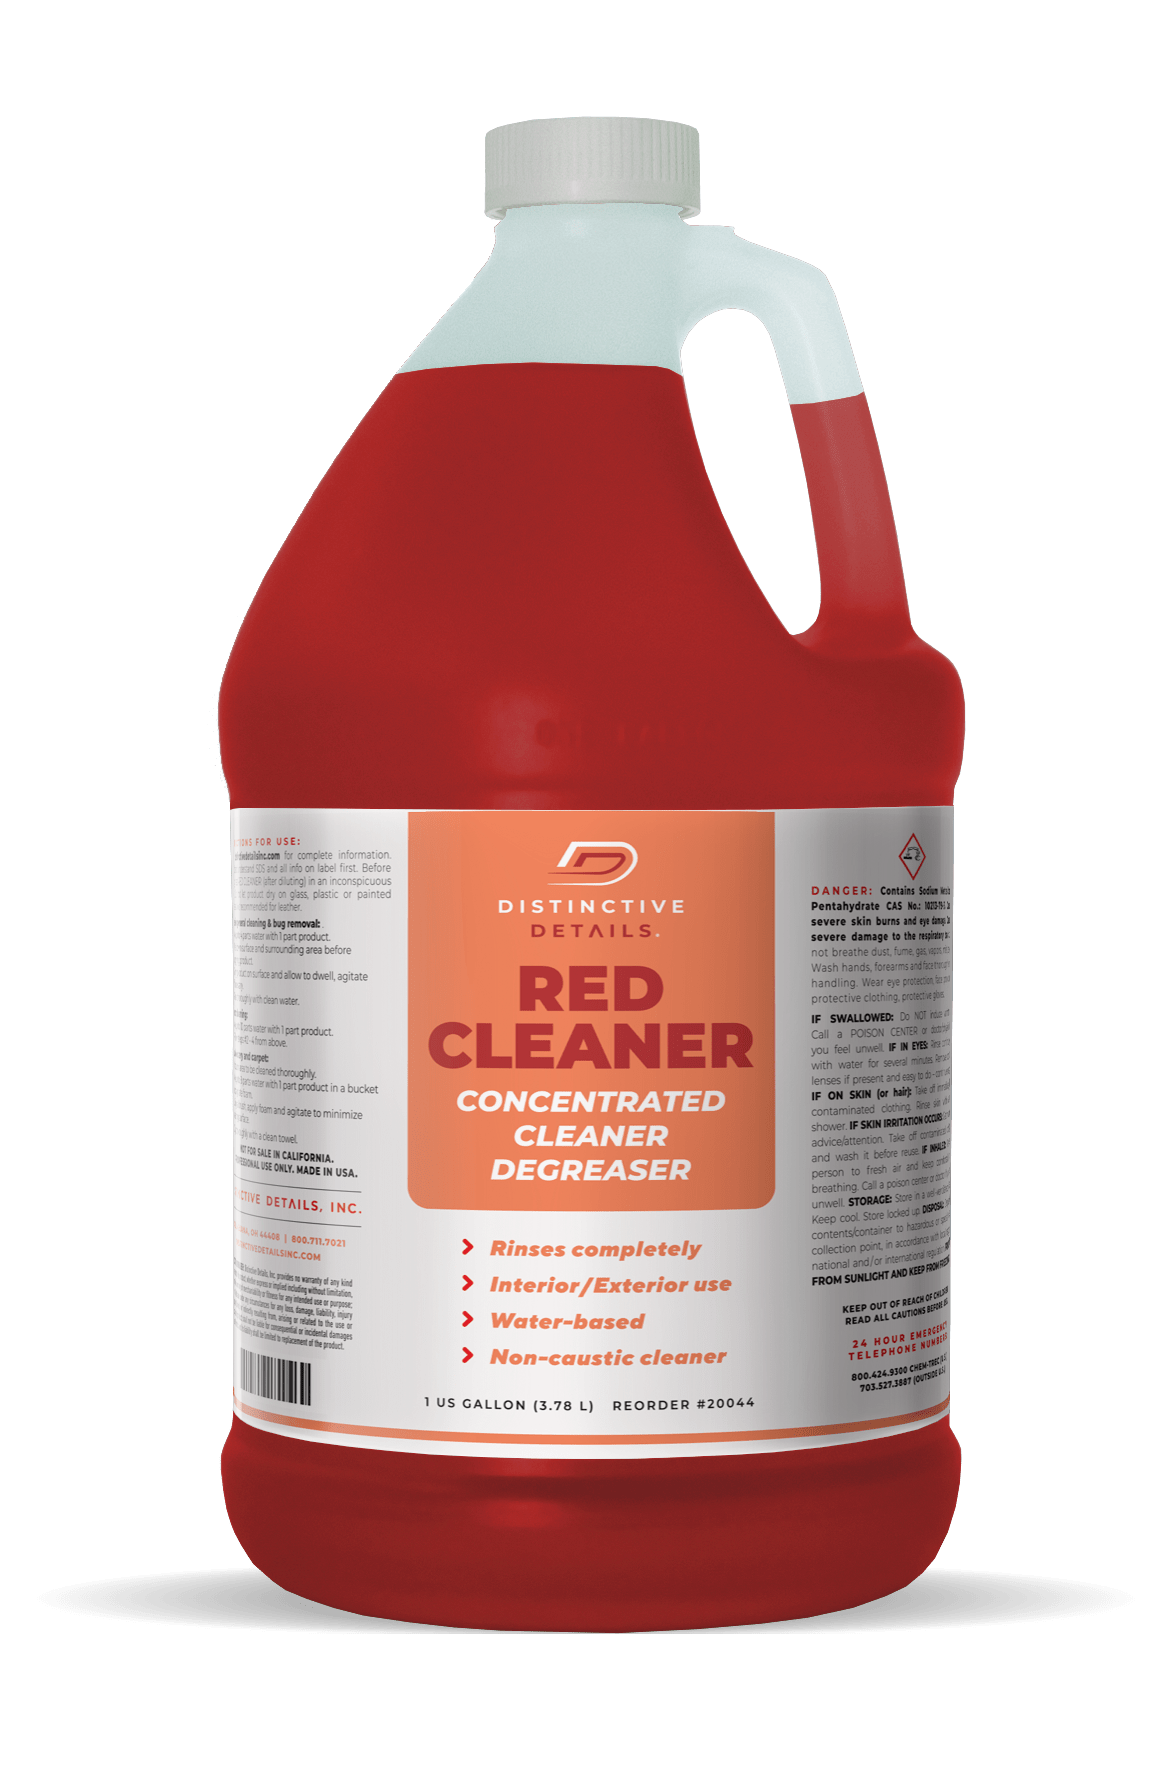 Base cleaners